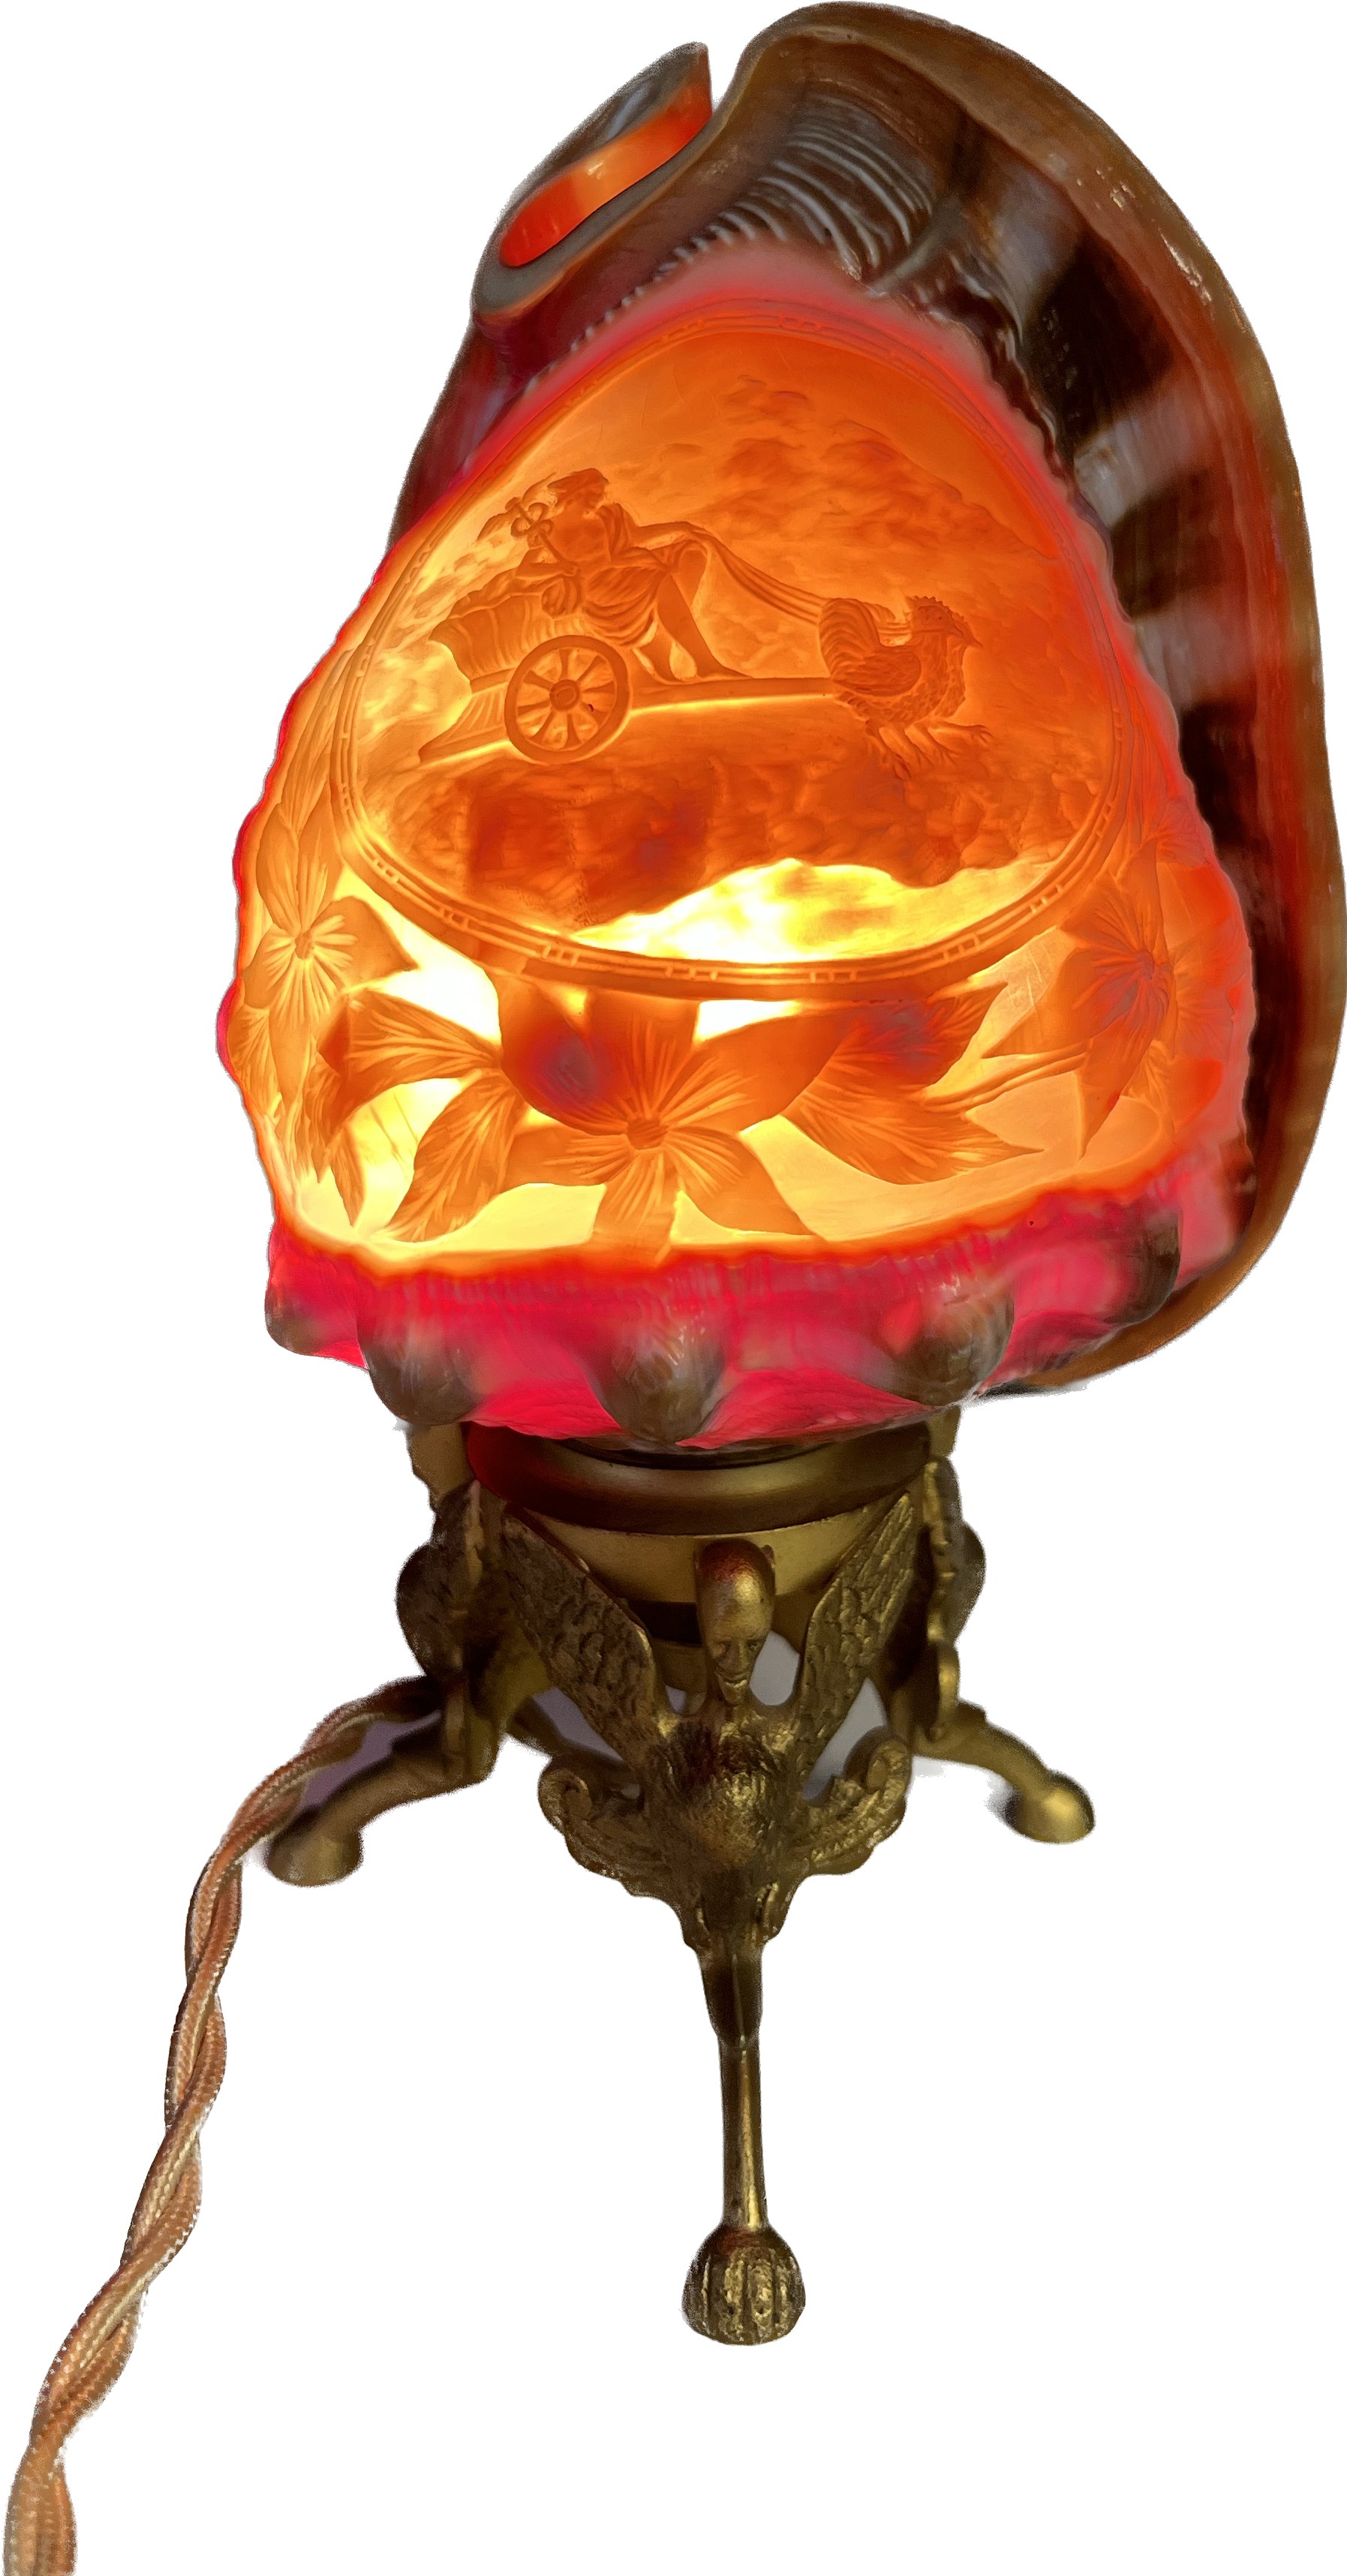 Antique carved Cameo Conch shell table lamp. Sat upon a brass three foot stand. [Working] [21cm